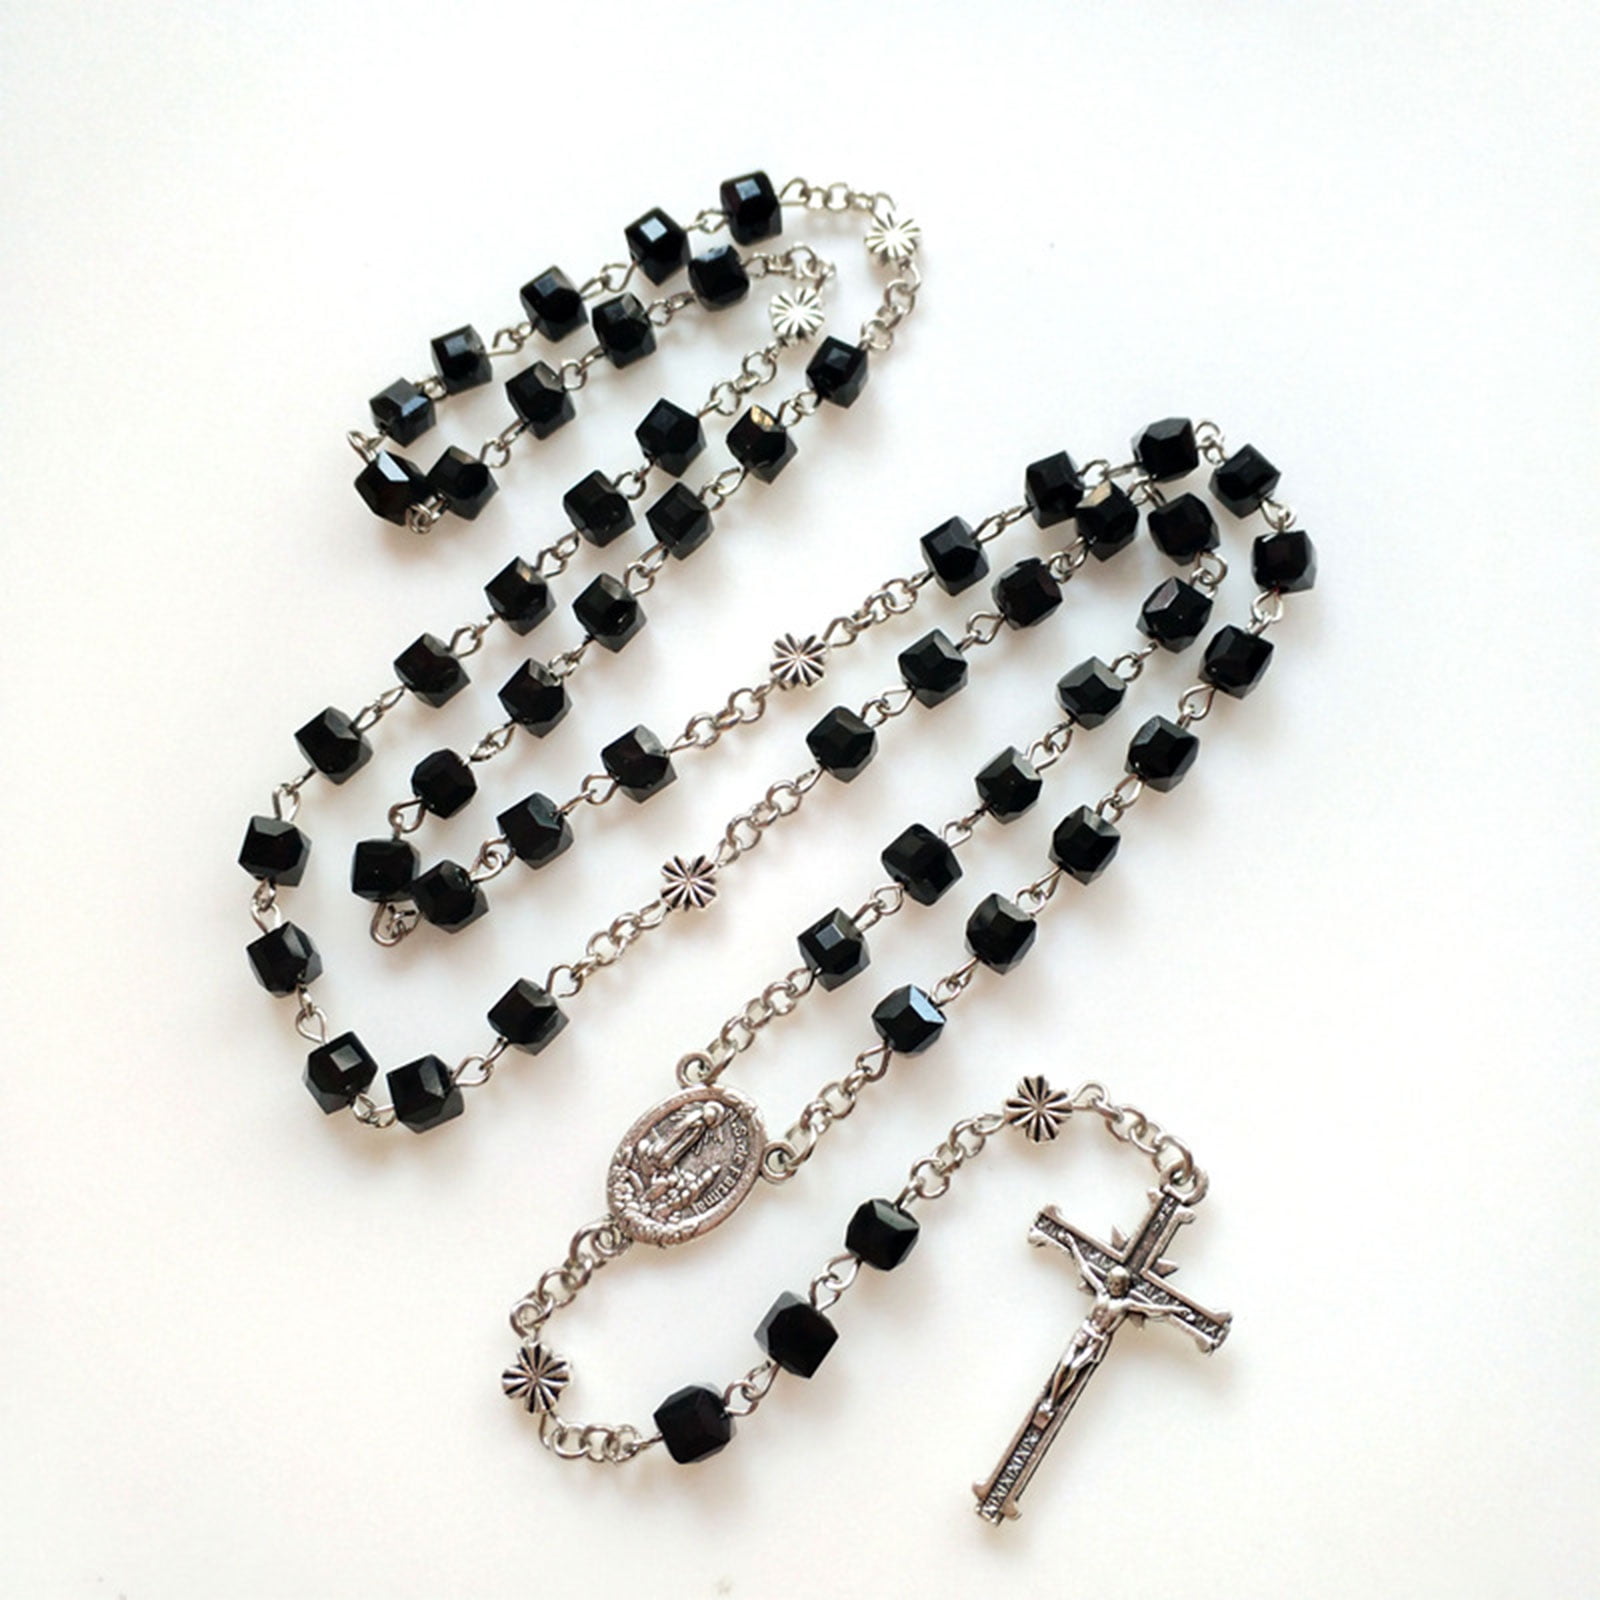 Men's Beaded Necklace With Cross | Lord's Guidance